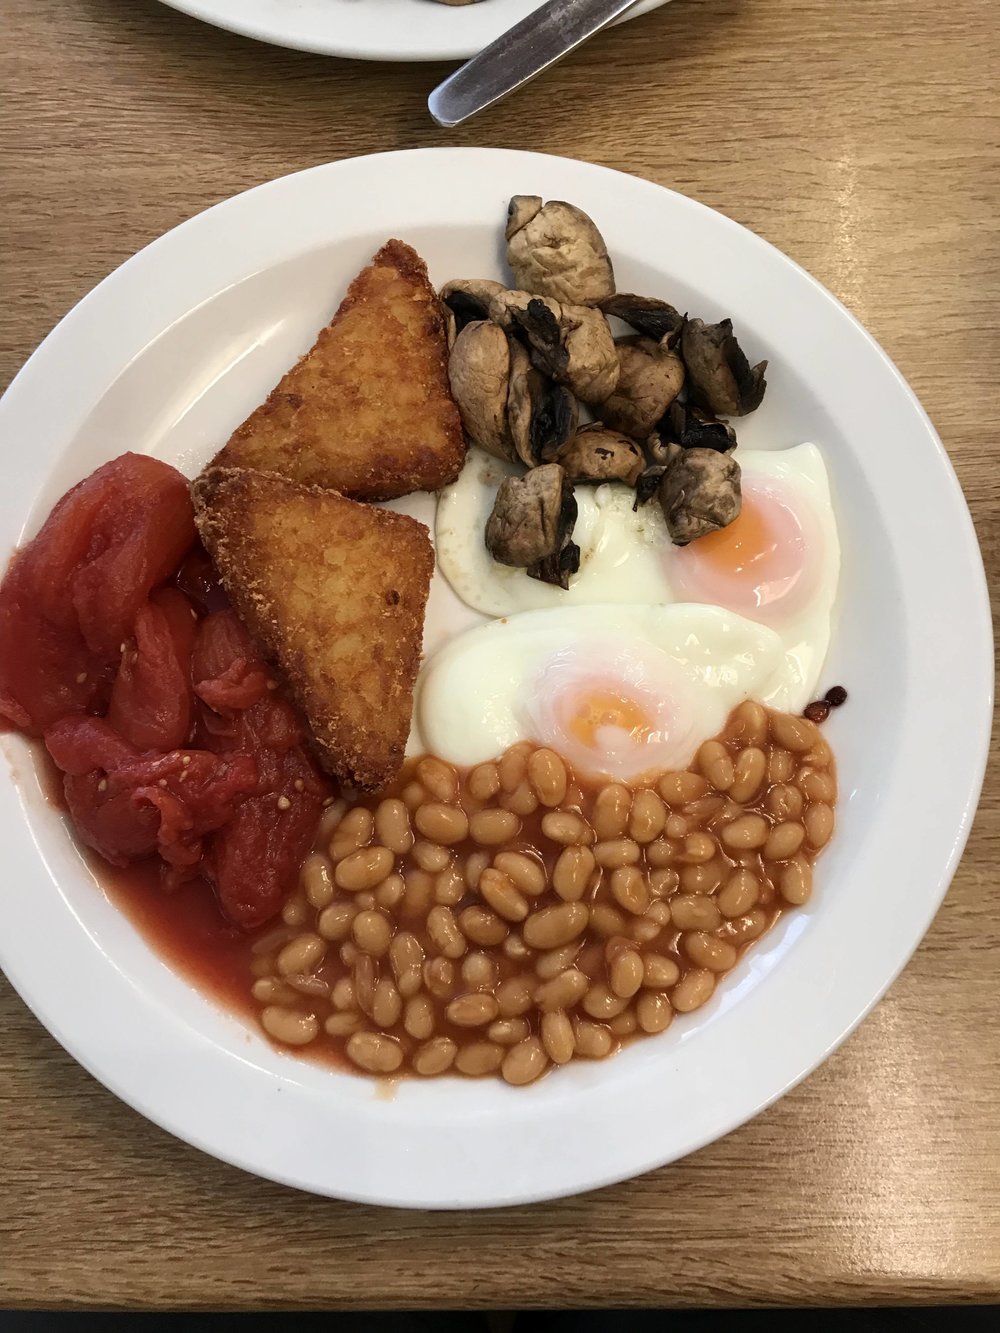 another version of a traditional English breakfast